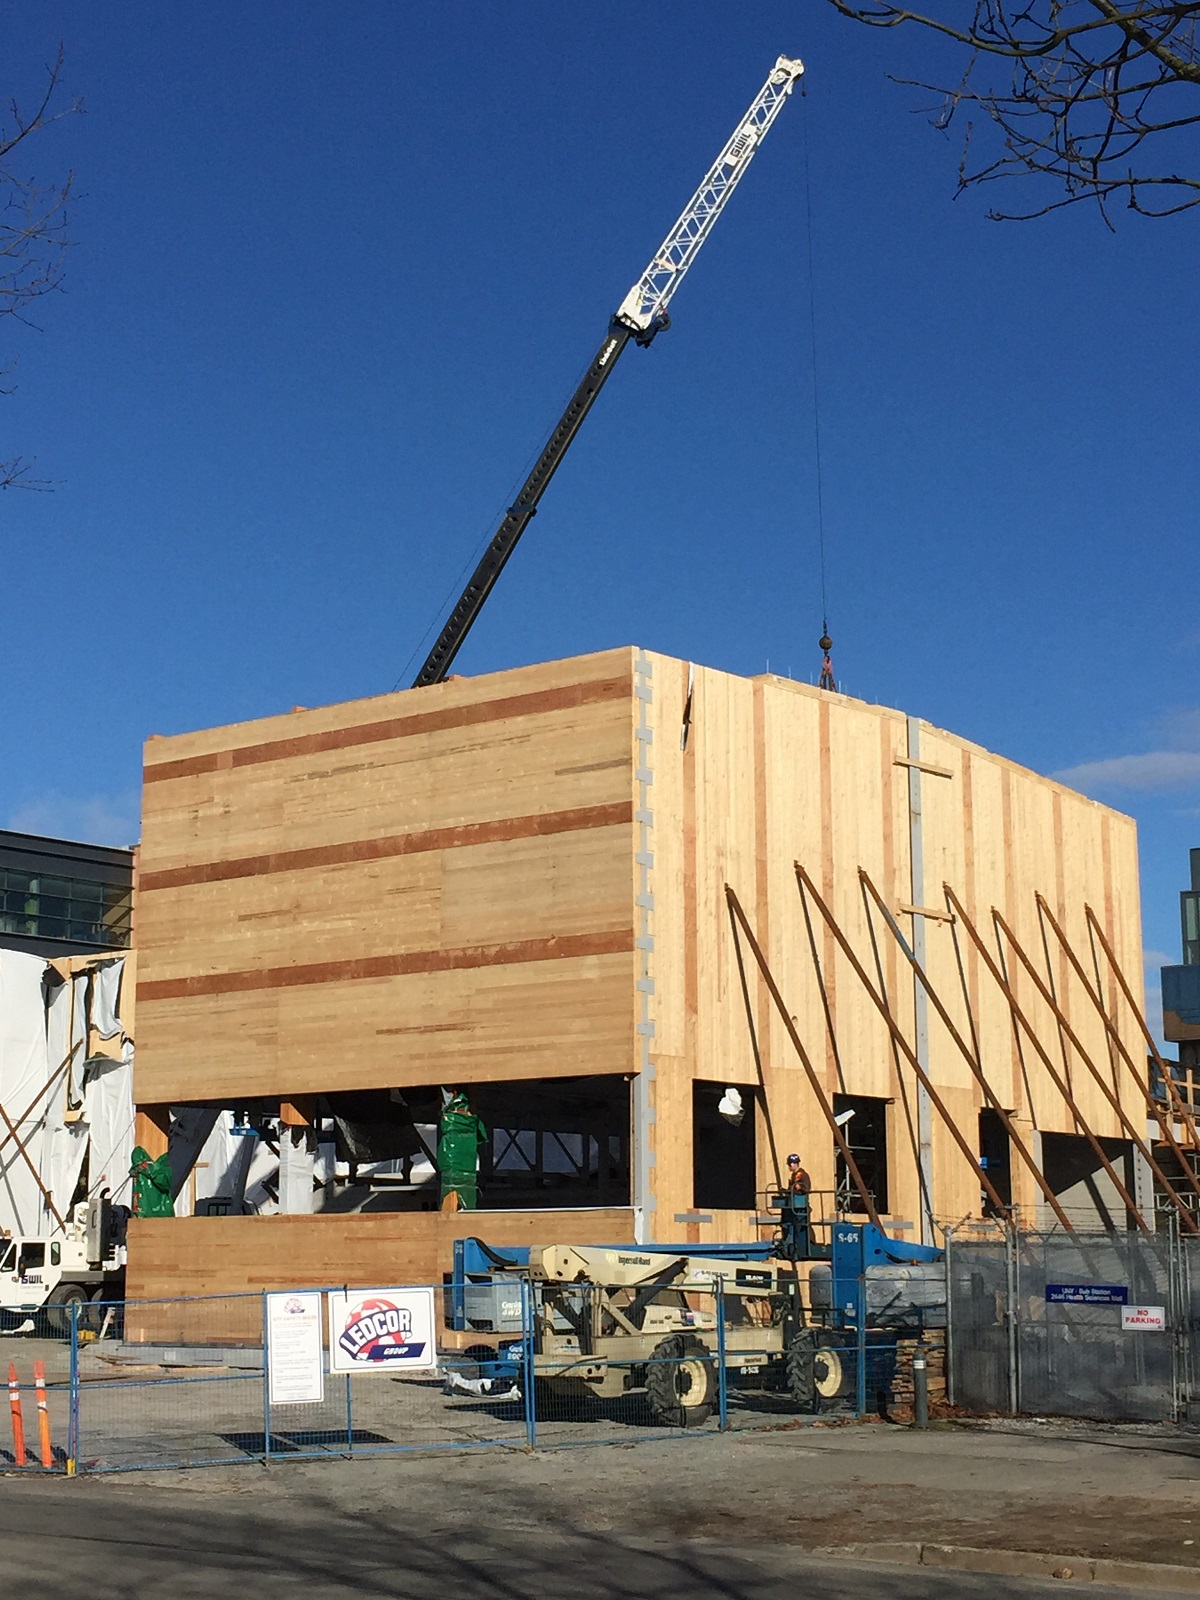 The UBC Campus Energy Centre primary structure, built from glue-laminated timber (glulam) post and beam frame, with cross-laminated timber (CLT) enclosed walls and roof, is shown in this sunny daytime early construction image with a crane